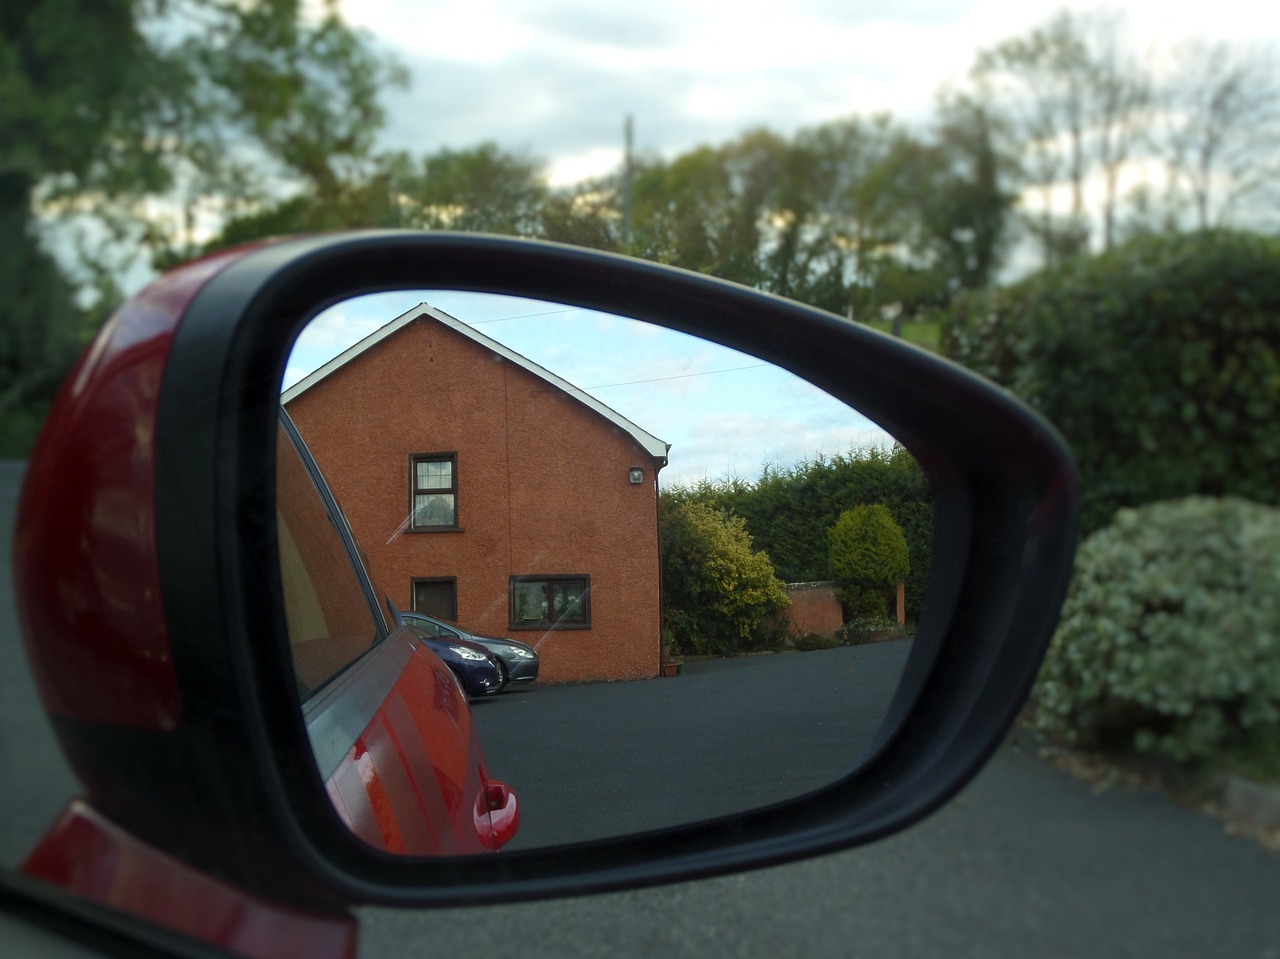 car rearview mirror reflection free photo